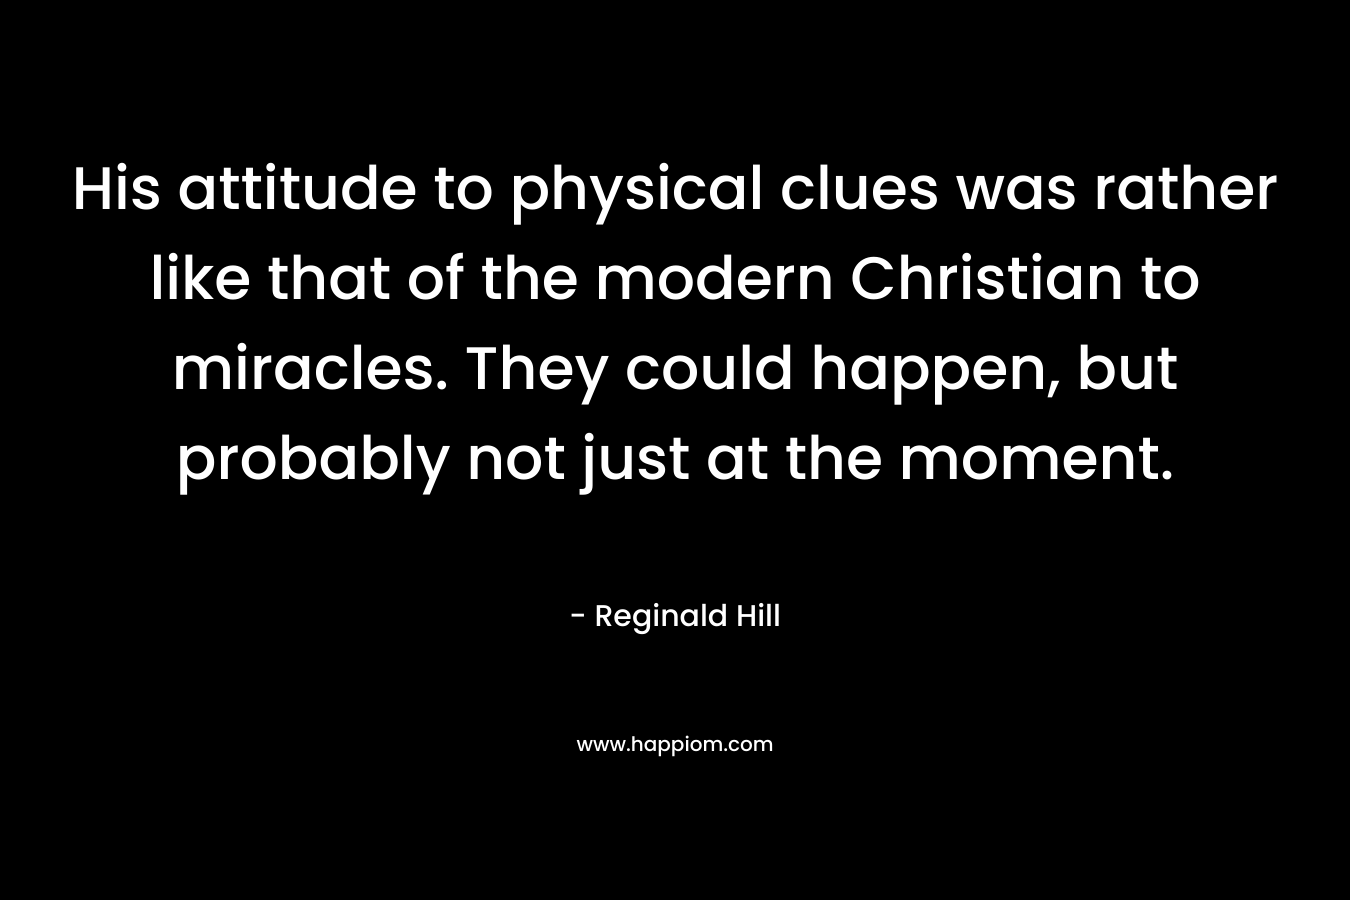 His attitude to physical clues was rather like that of the modern Christian to miracles. They could happen, but probably not just at the moment. – Reginald Hill